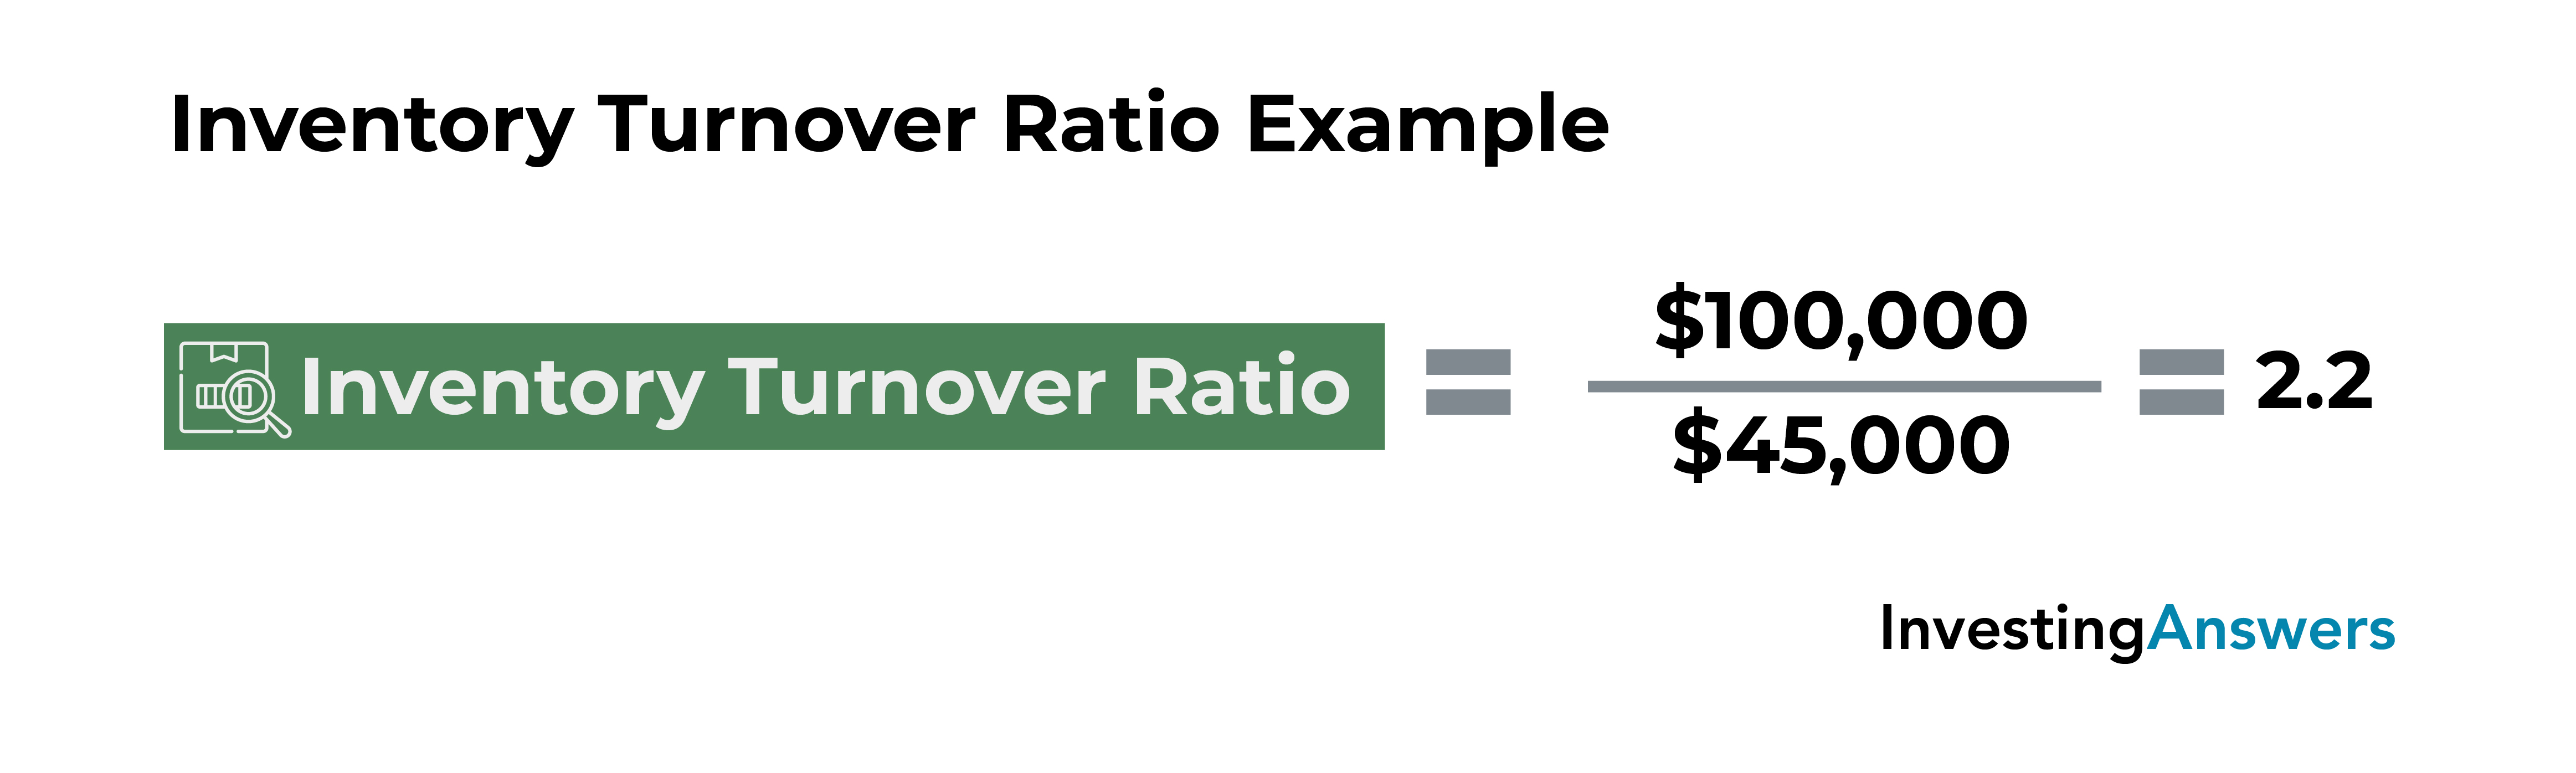 inventory turnover ratio example